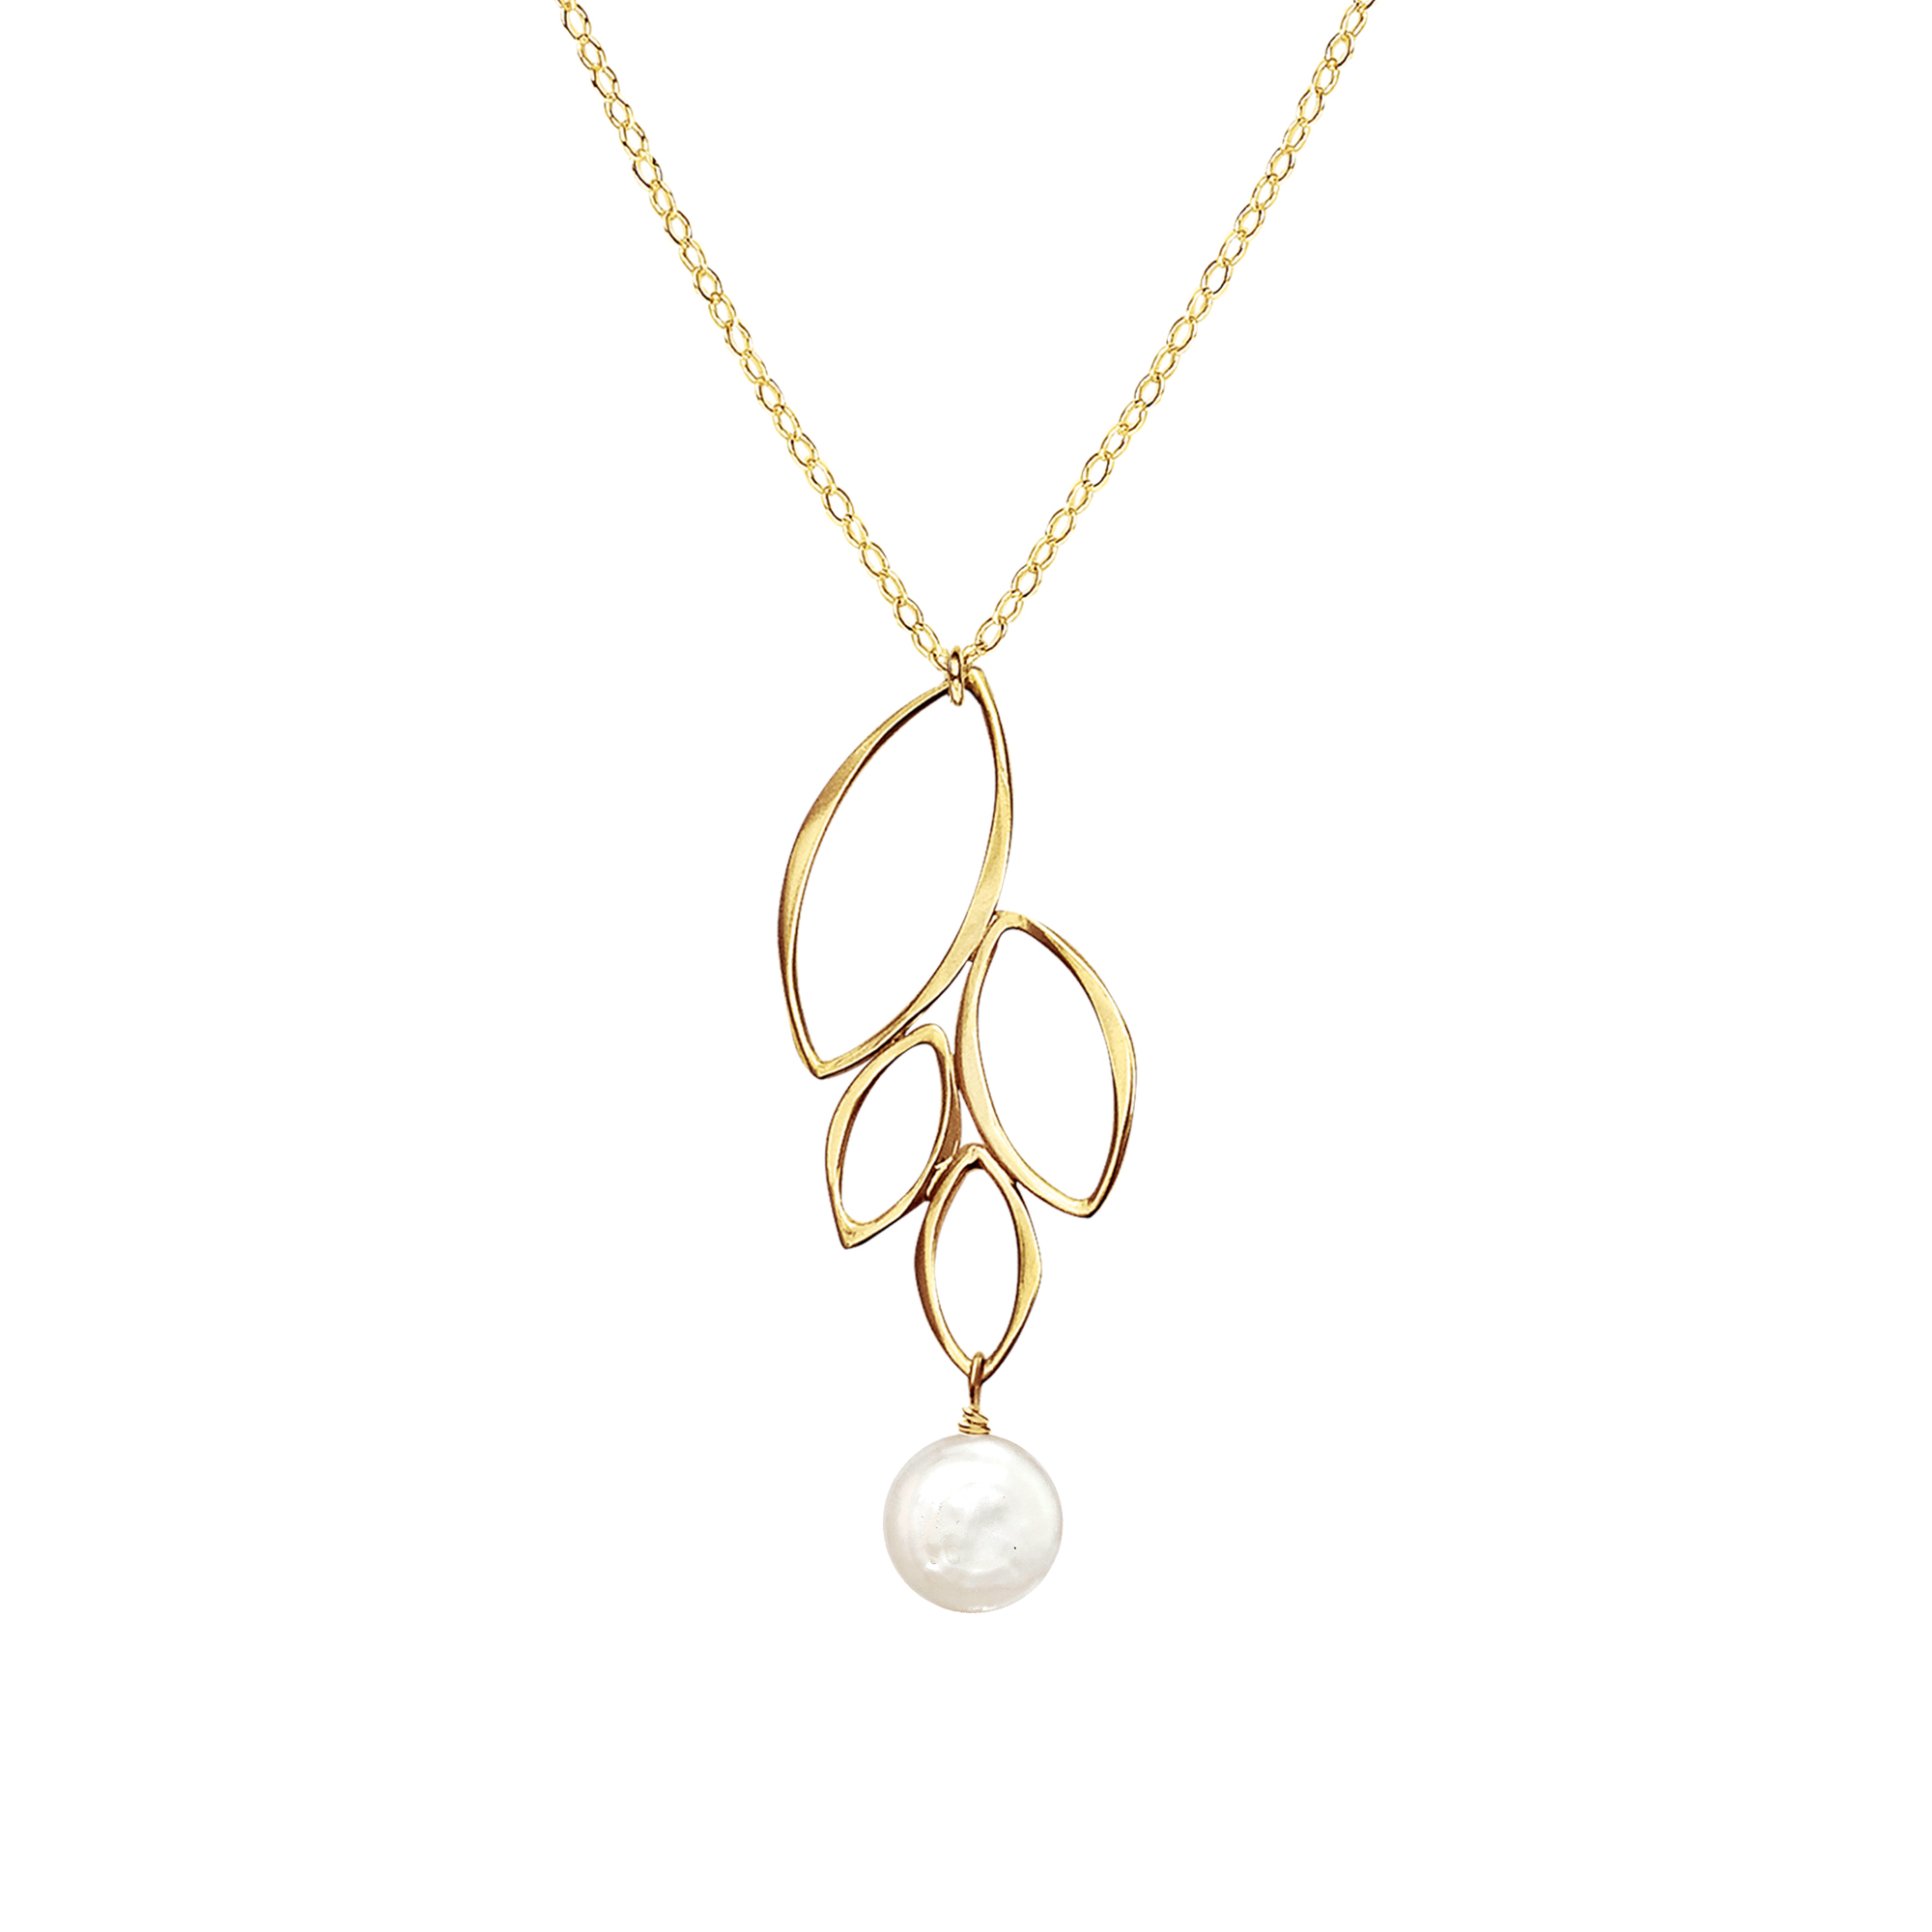 Image of a gold four leaf dangle necklace with white coin pearl on white background